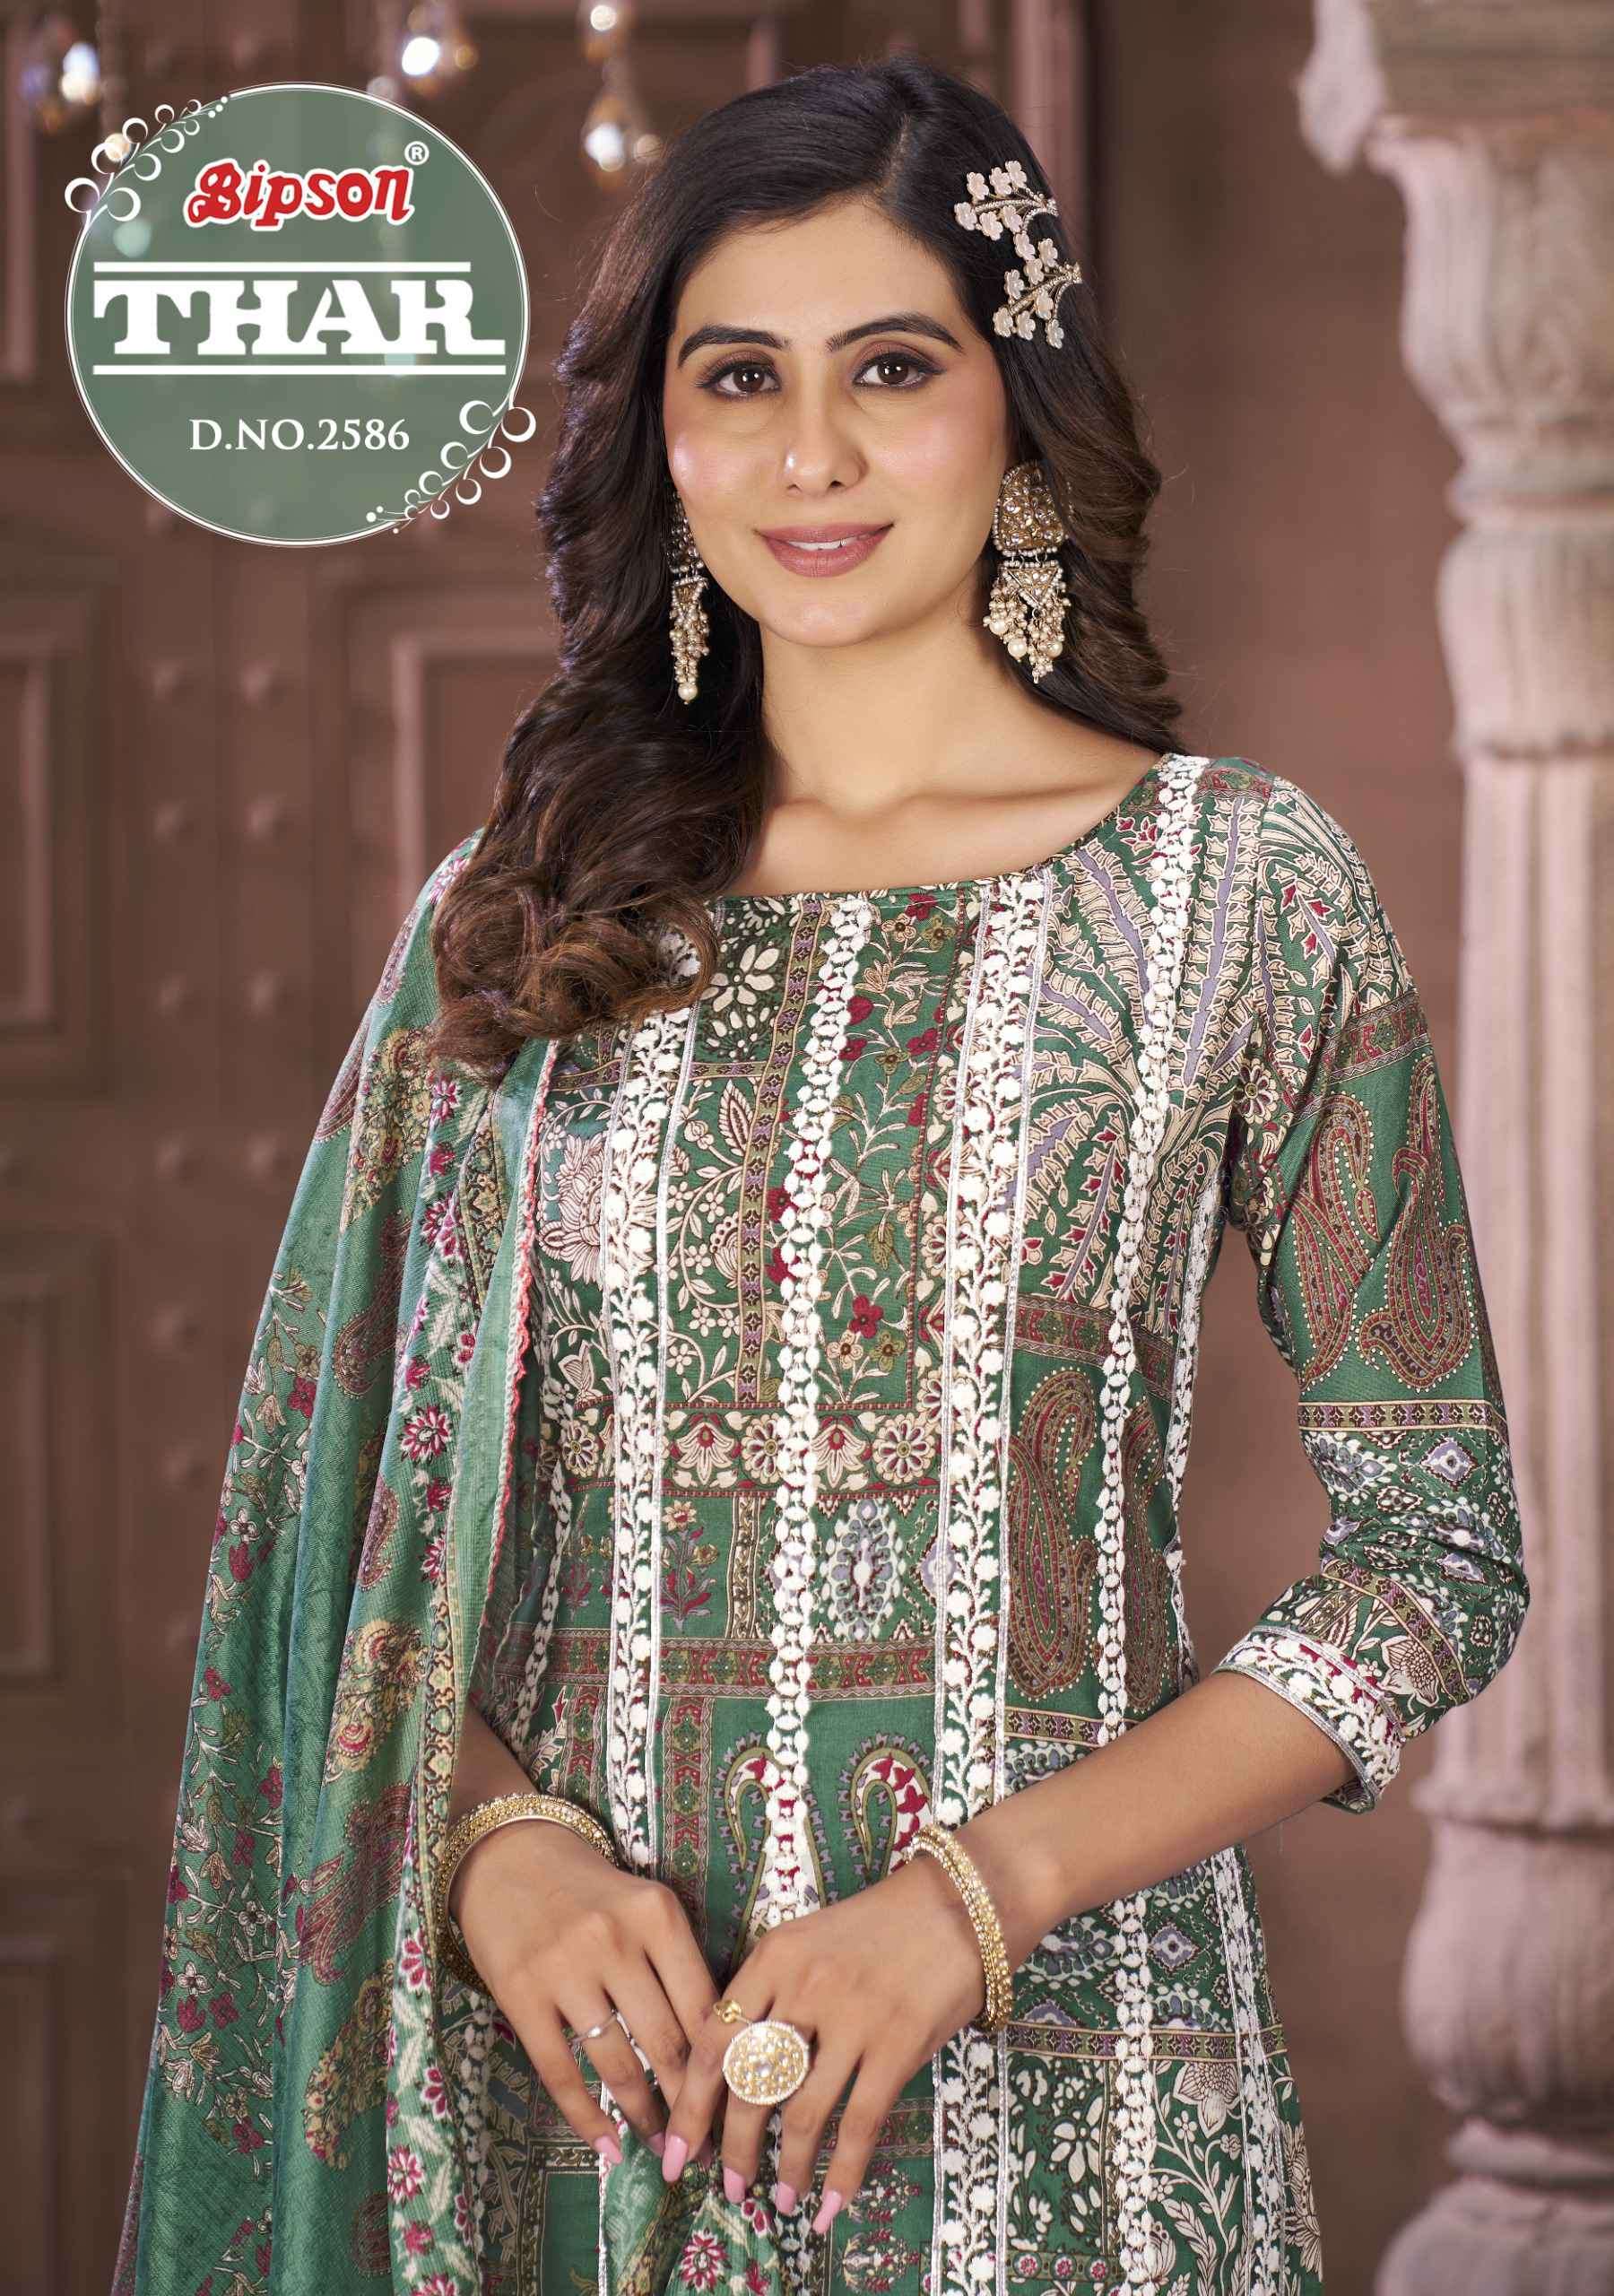 Bipson Thar 2586 Fancy Lace Work Cotton Suit Buyers Online Collection